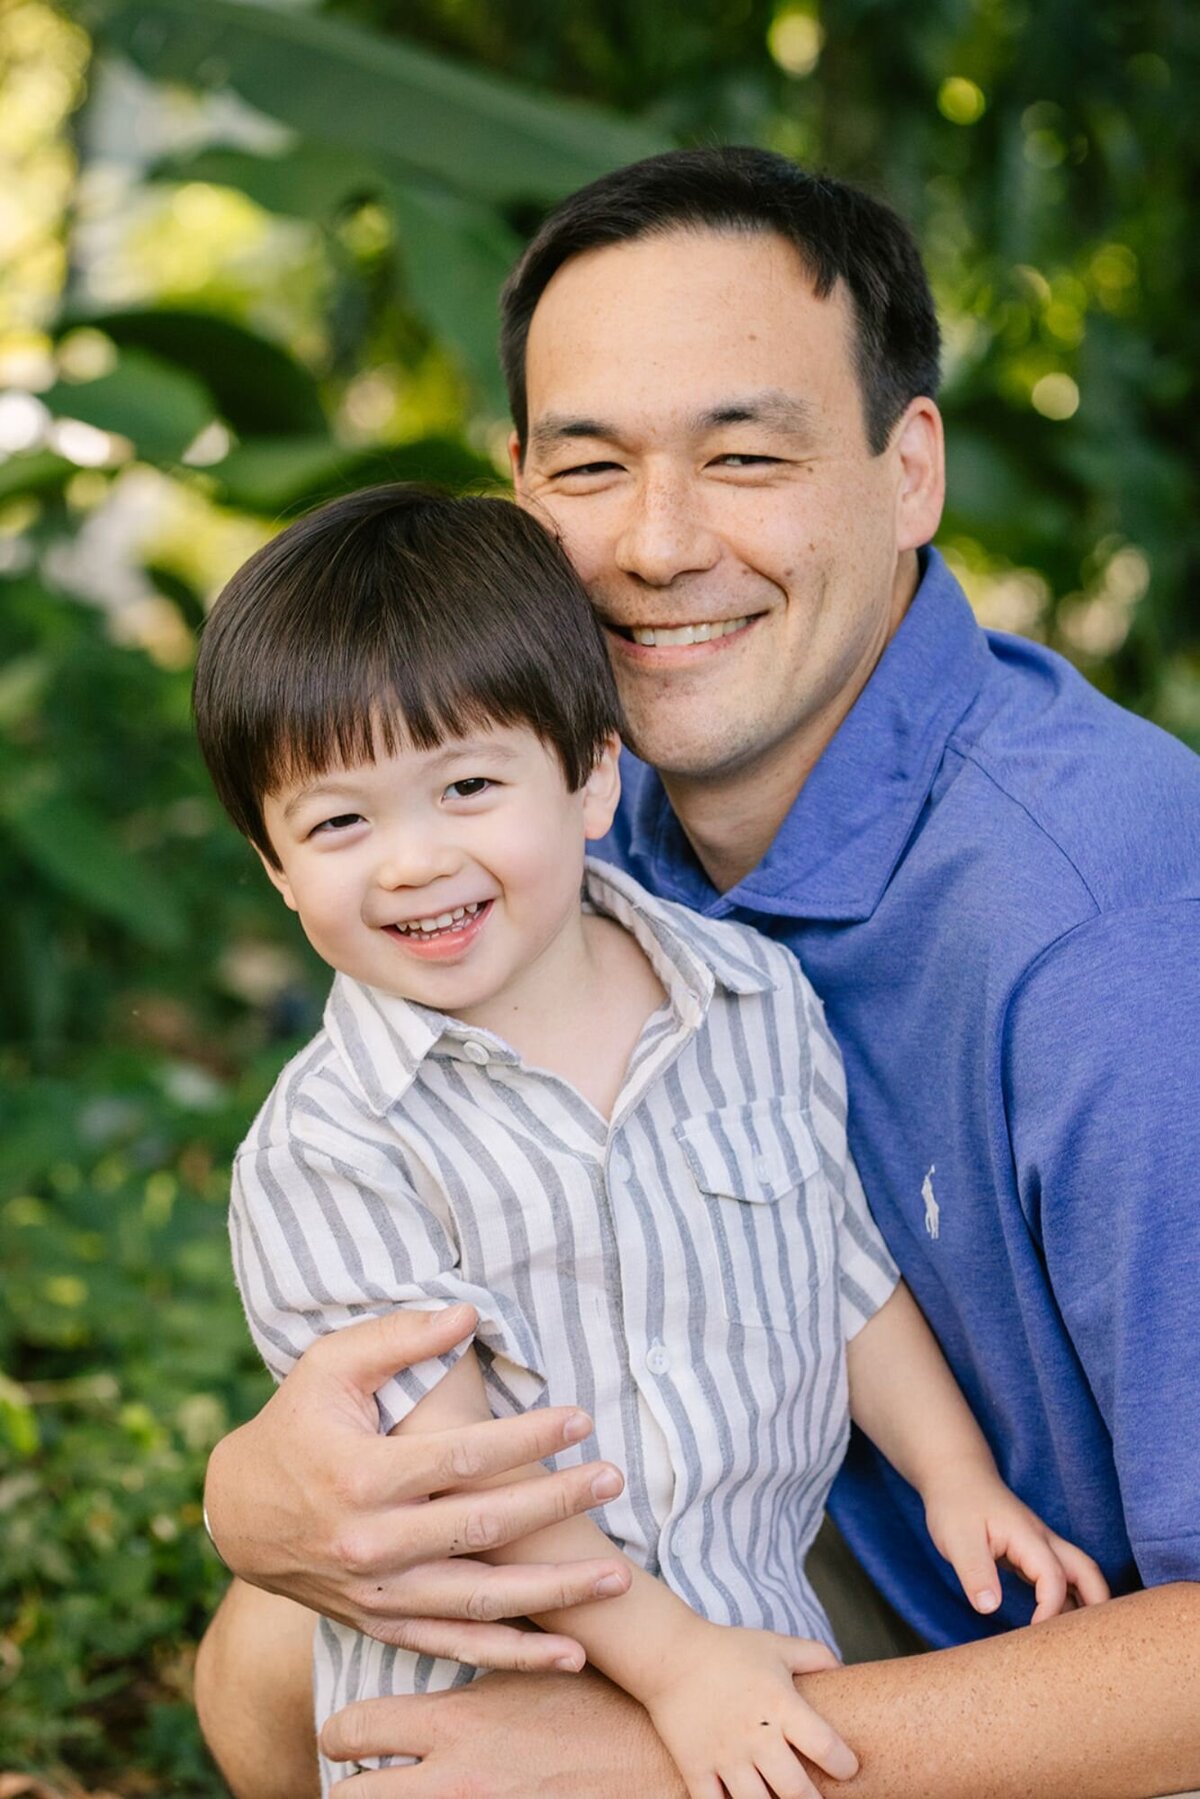 dad and son laughing during photoshoot